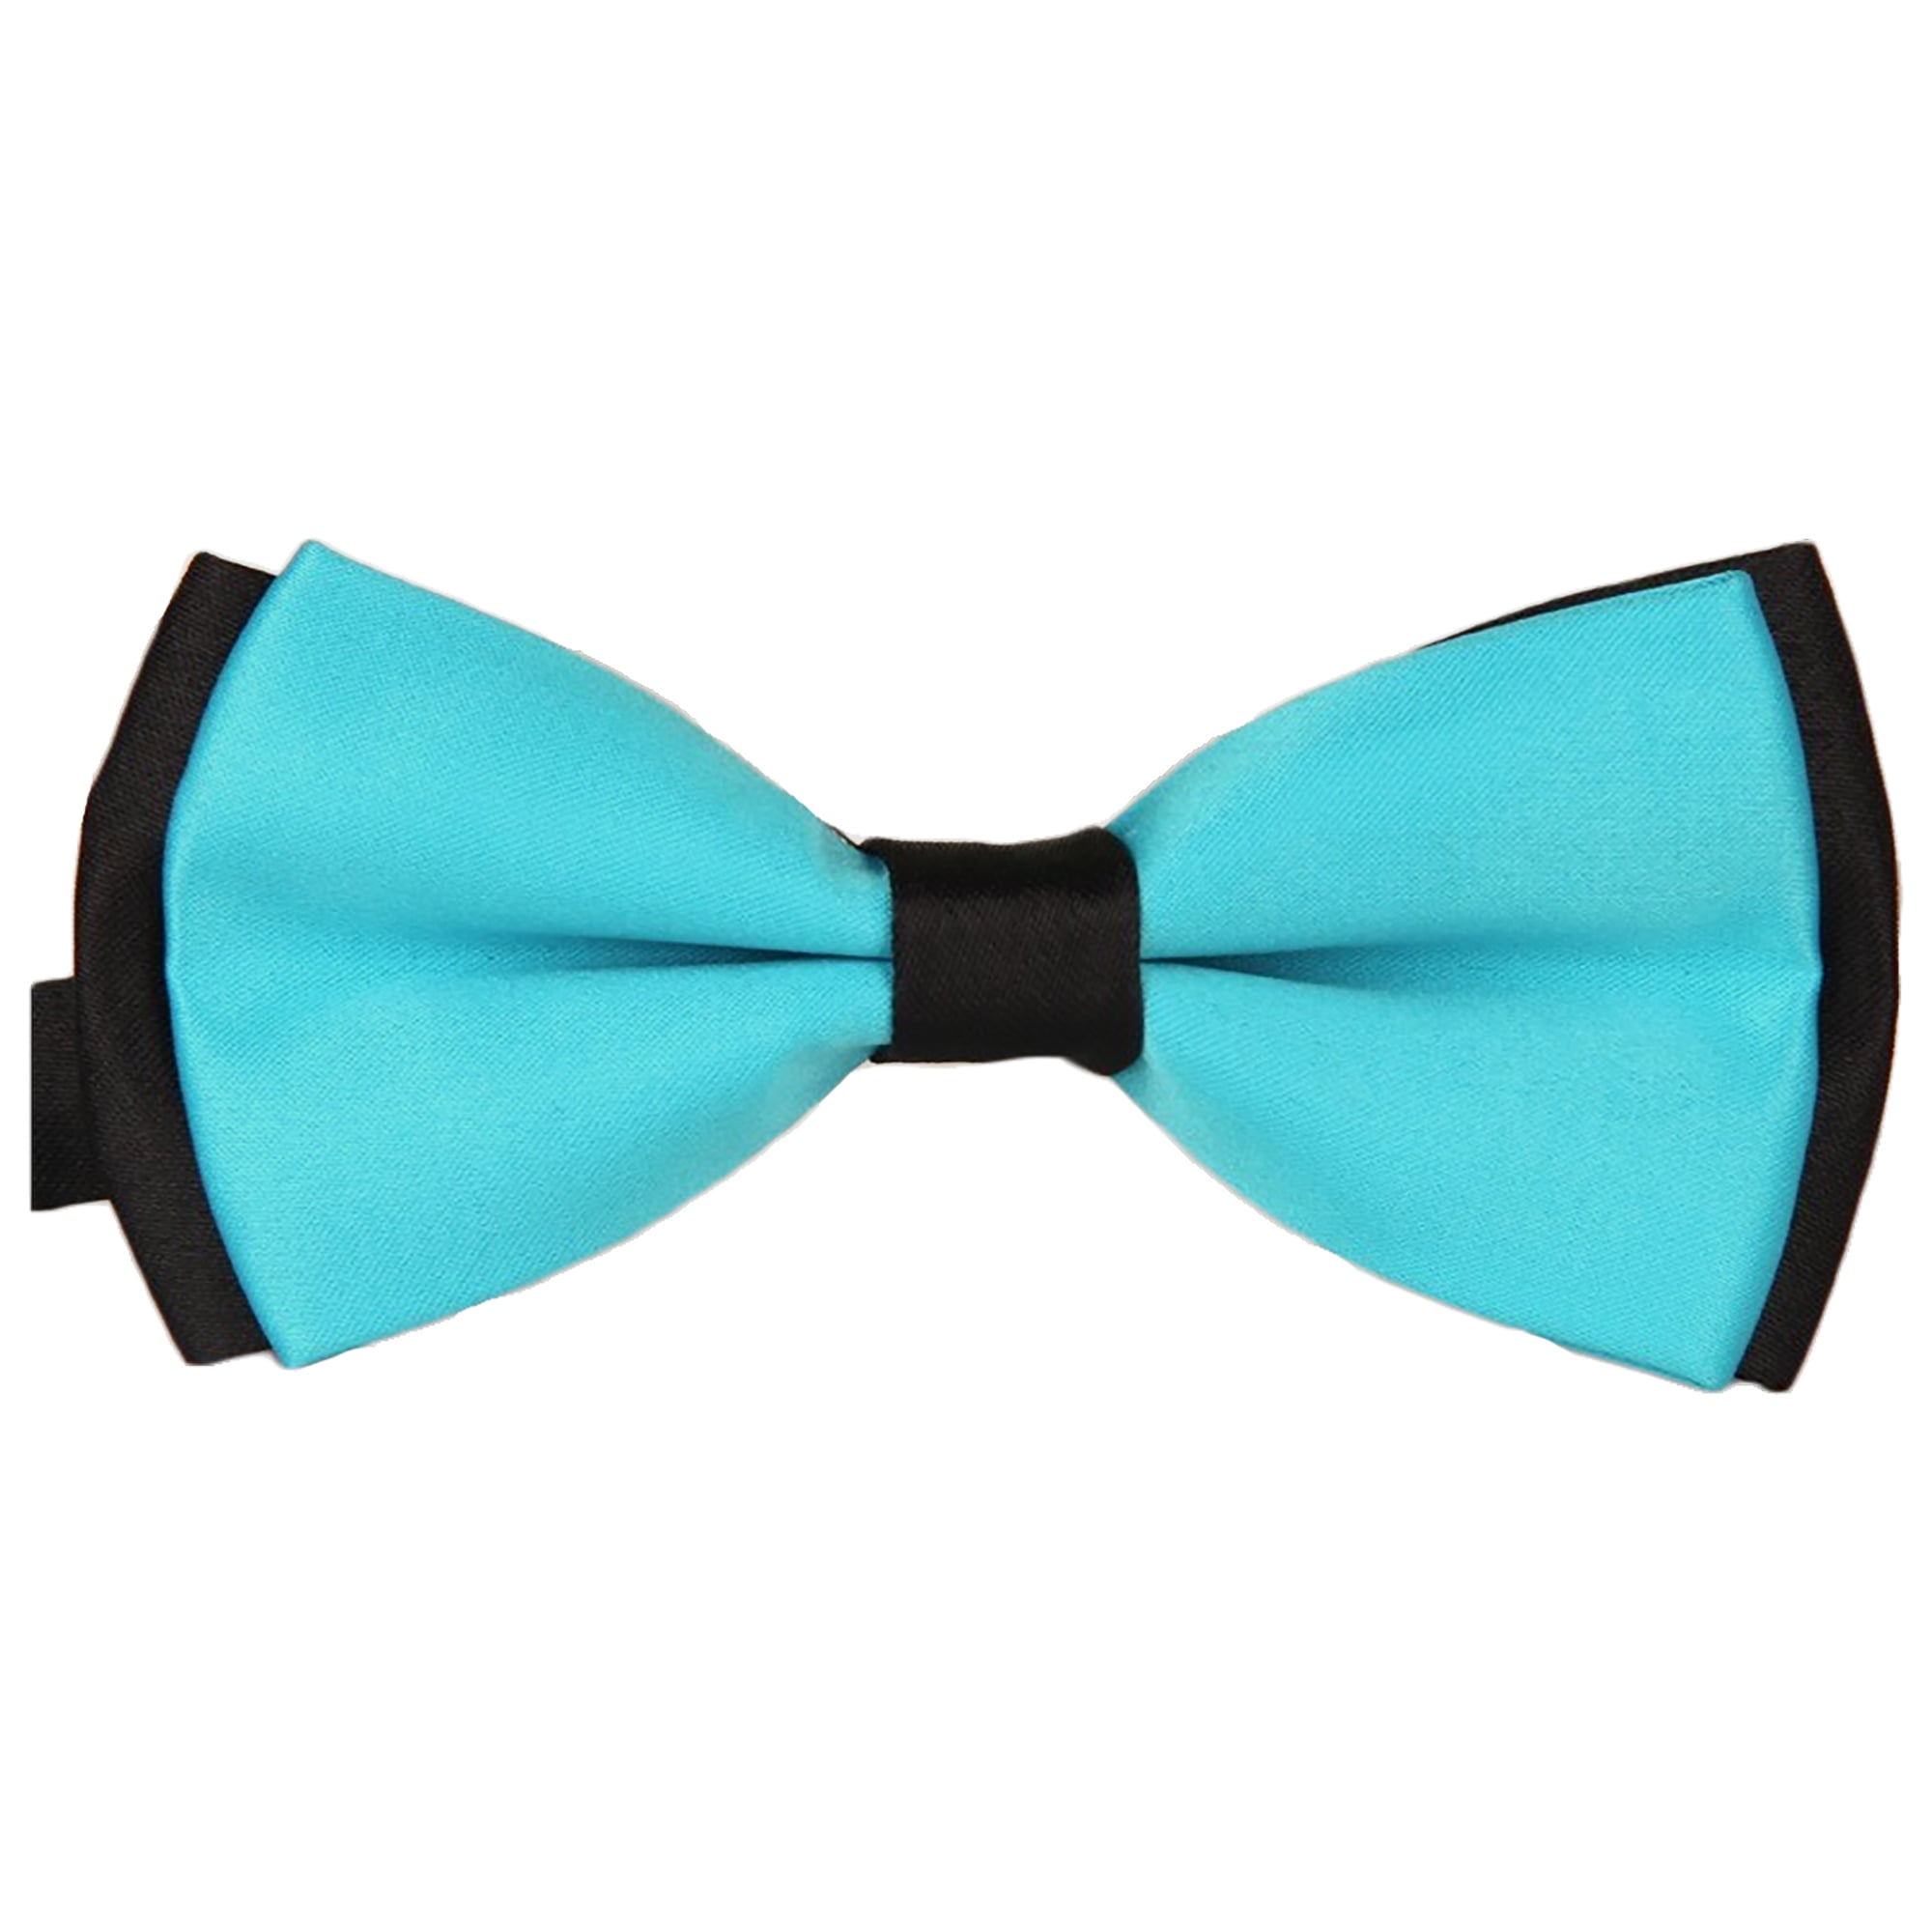 Mens Pre-Tied Blue Bow Tie for Formal Events 